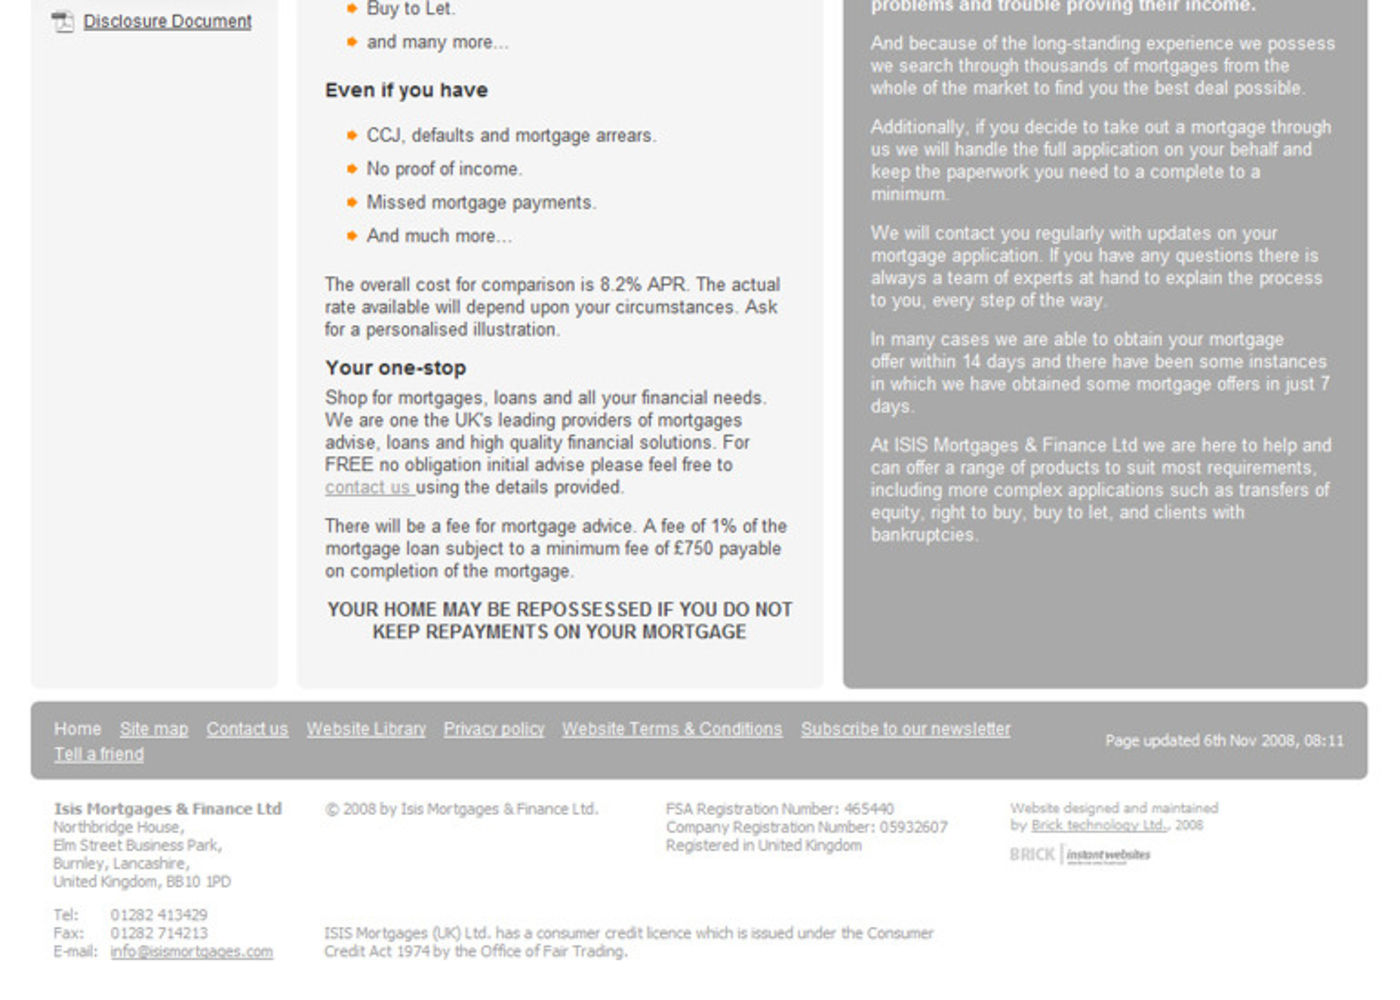 Isis Mortgages & Finance Ltd Homepage footer